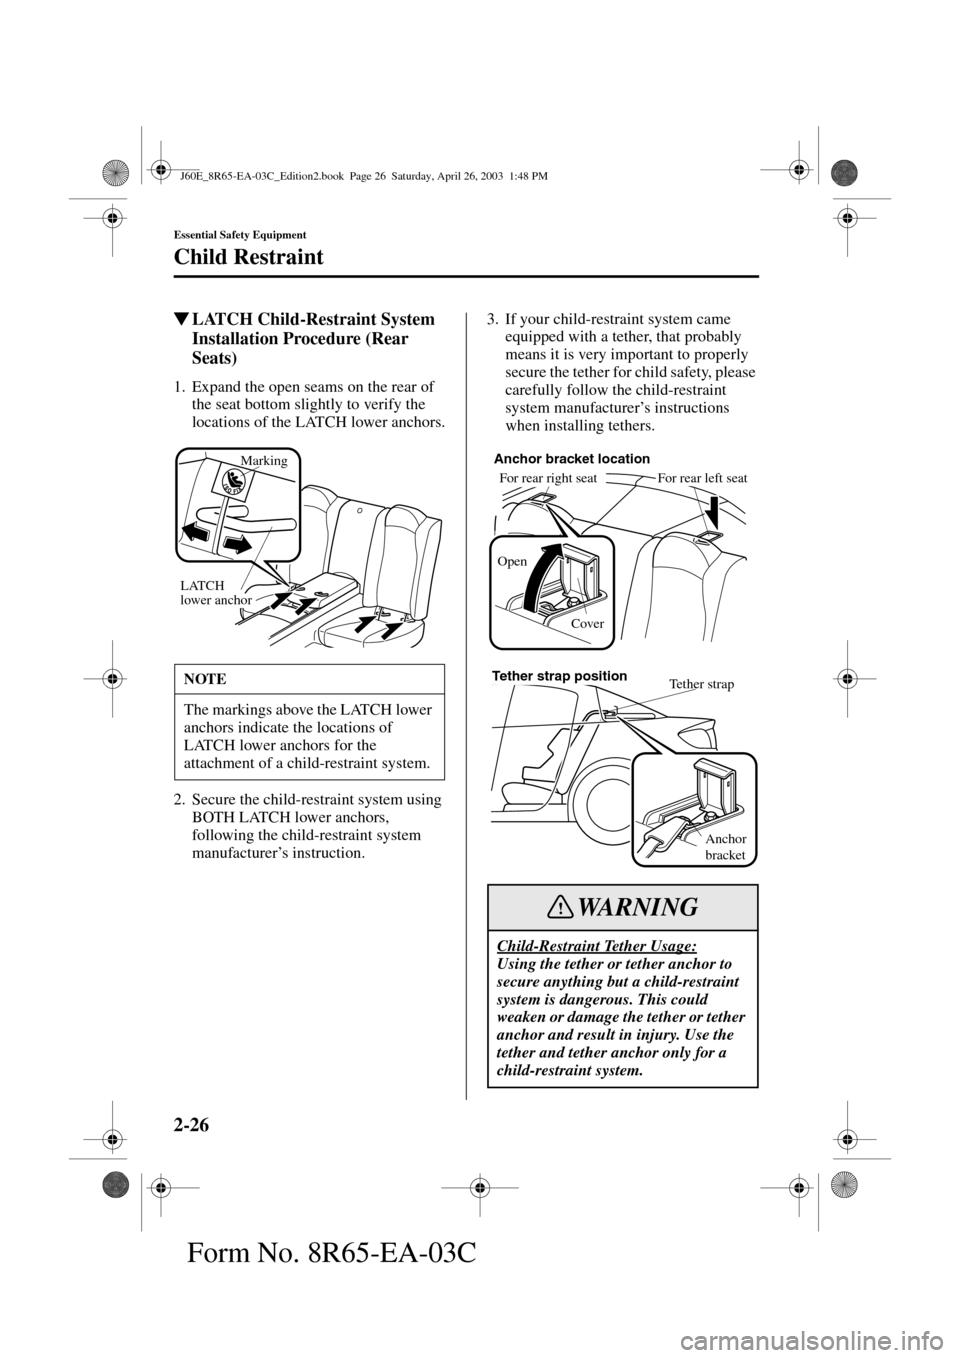 MAZDA MODEL RX 8 2004   (in English) Owners Guide 2-26
Essential Safety Equipment
Child Restraint
Form No. 8R65-EA-03C
LATCH Child-Restraint System 
Installation Procedure (Rear 
Seats)
1. Expand the open seams on the rear of 
the seat bottom slight